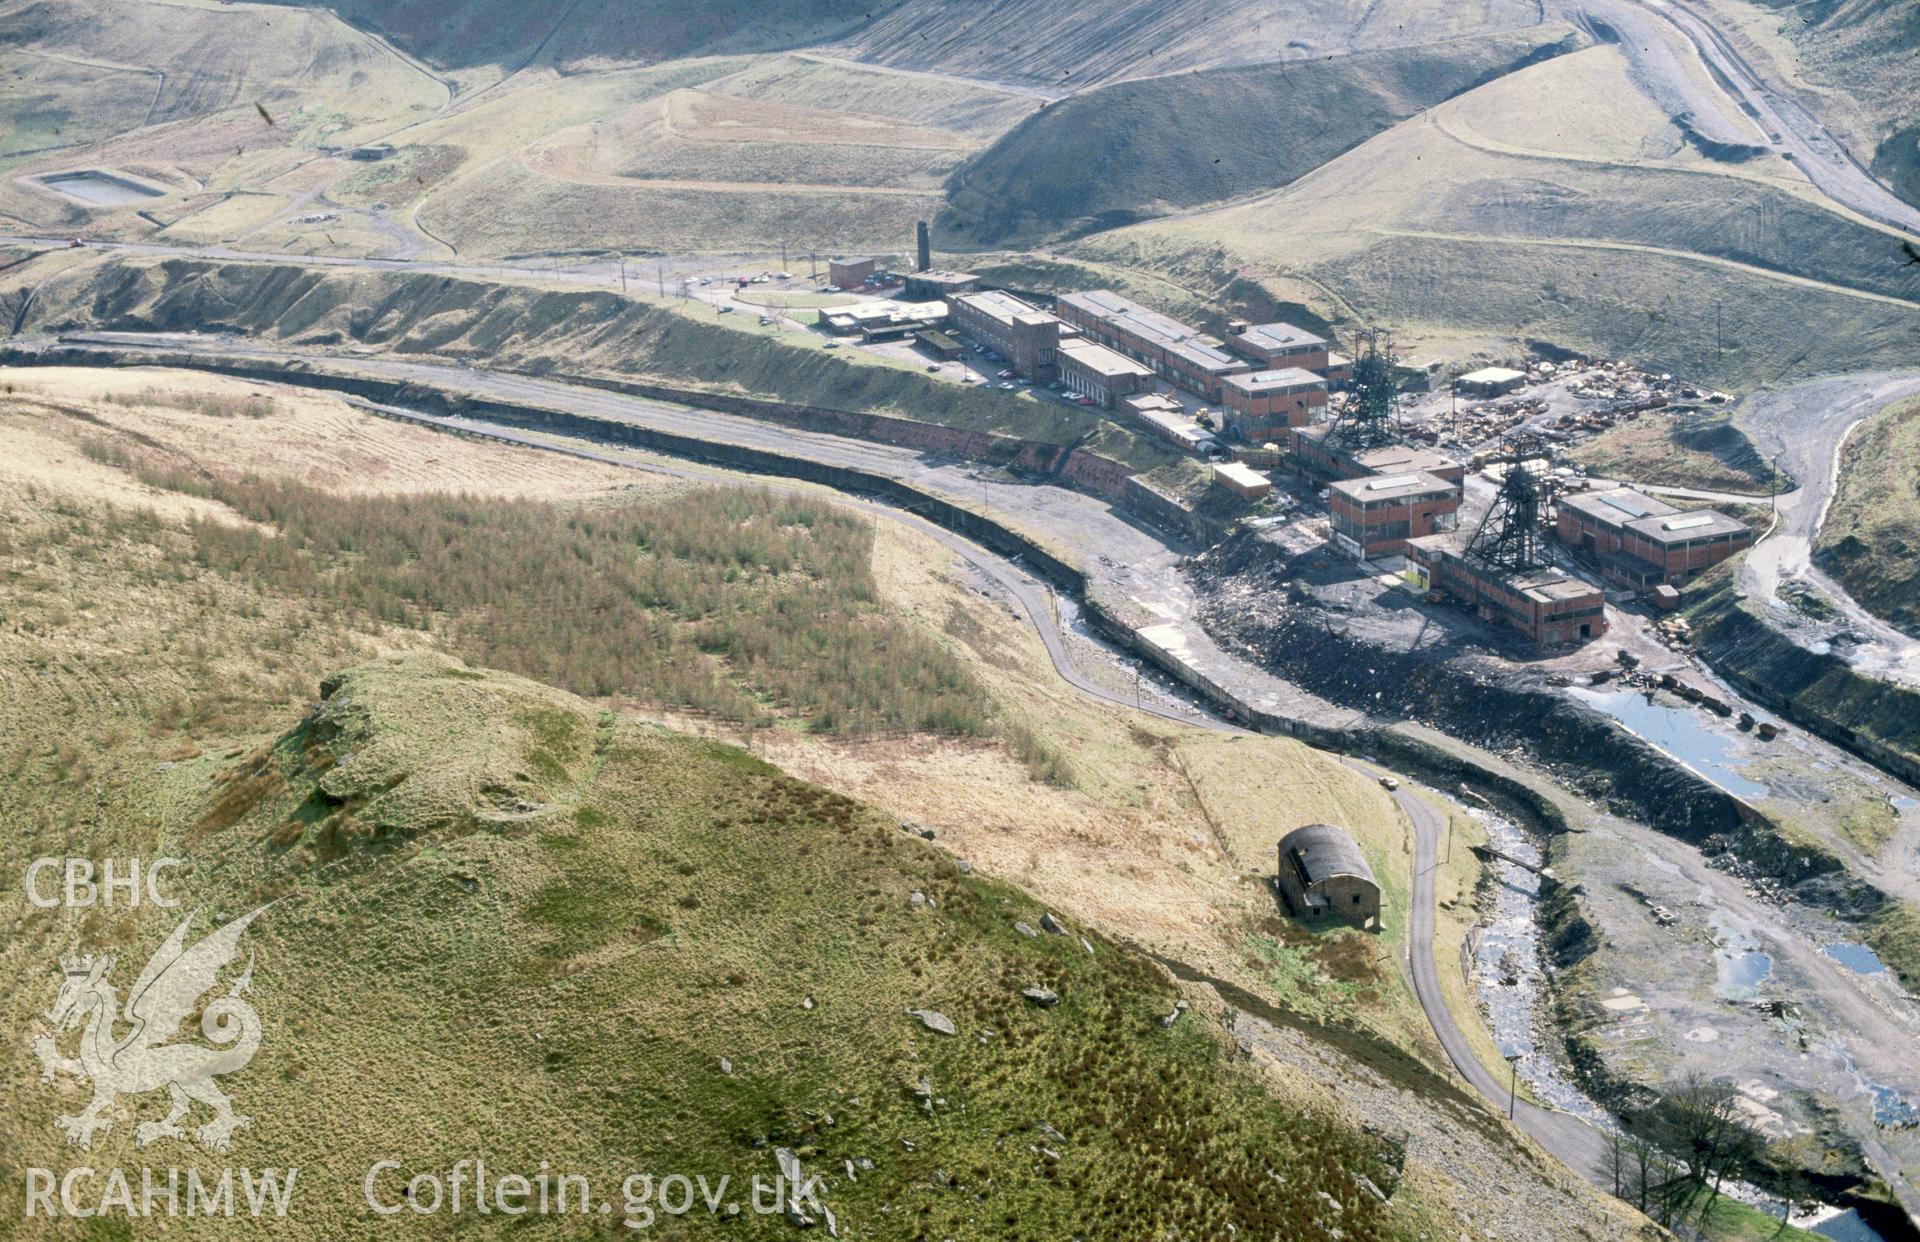 Slide of RCAHMW colour oblique aerial photograph of Maerdy Colliery, taken by C.R. Musson, 26/3/1990.